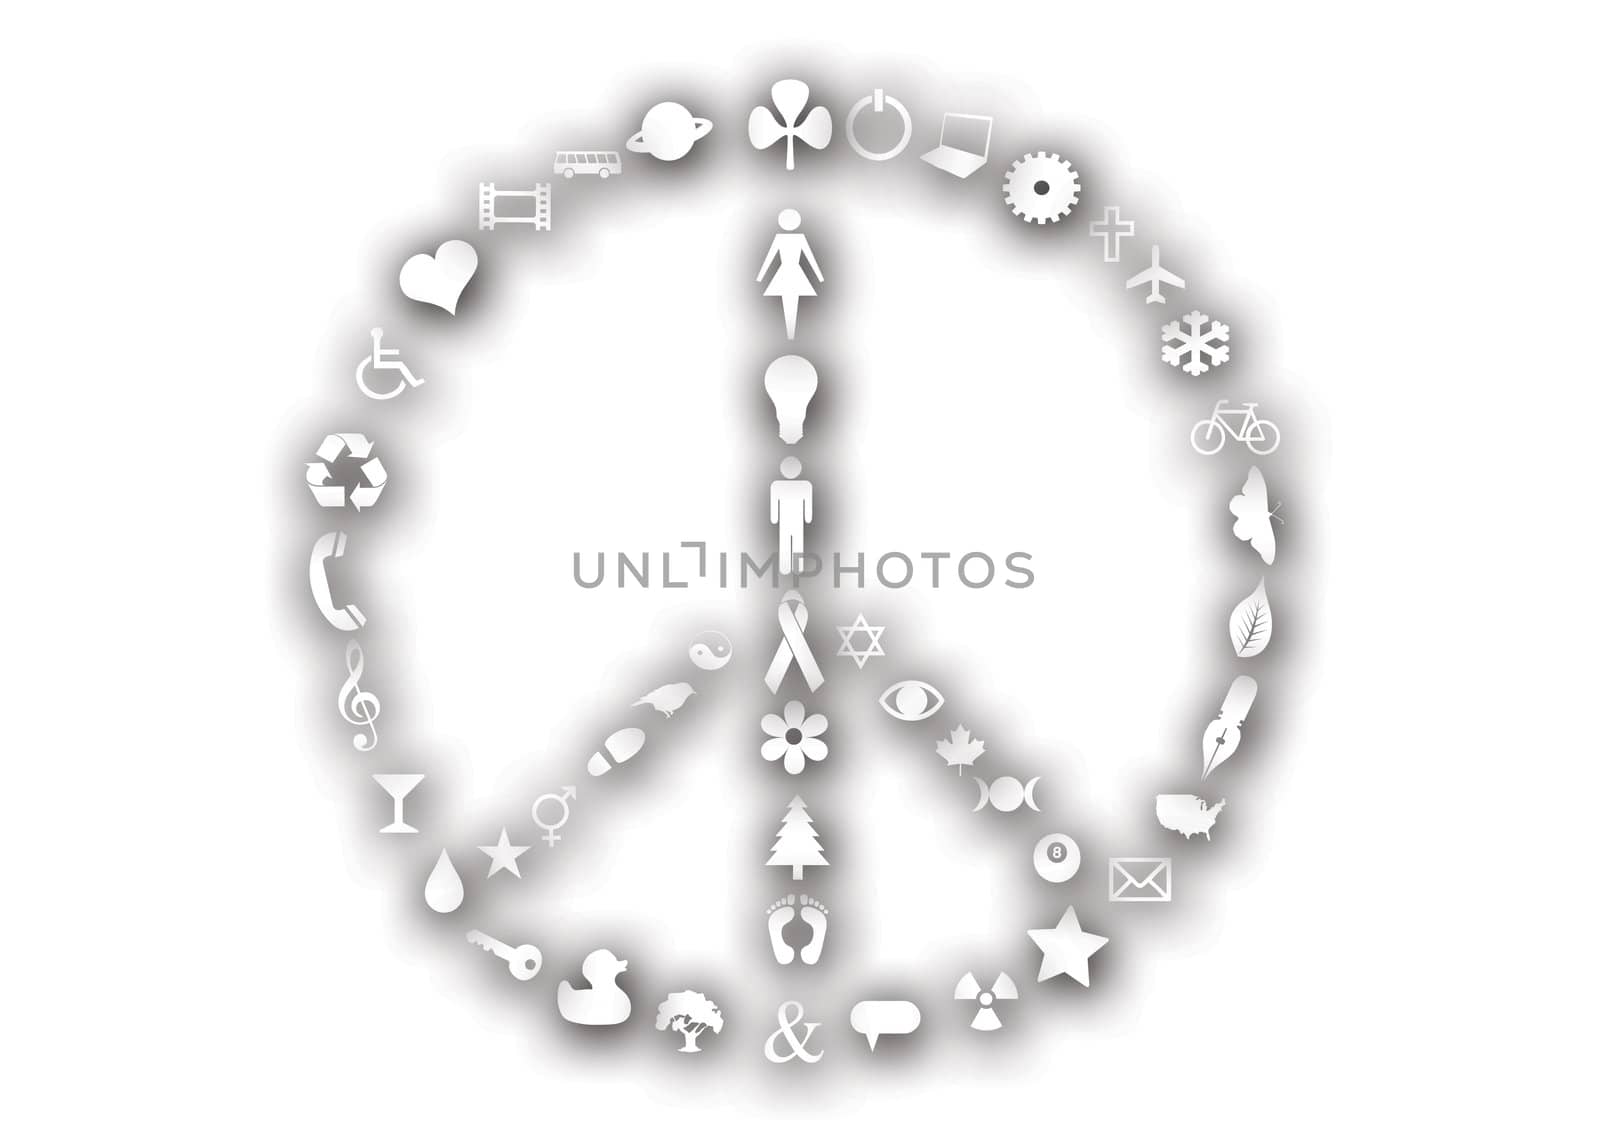 a Peace sign illustration made up of icons